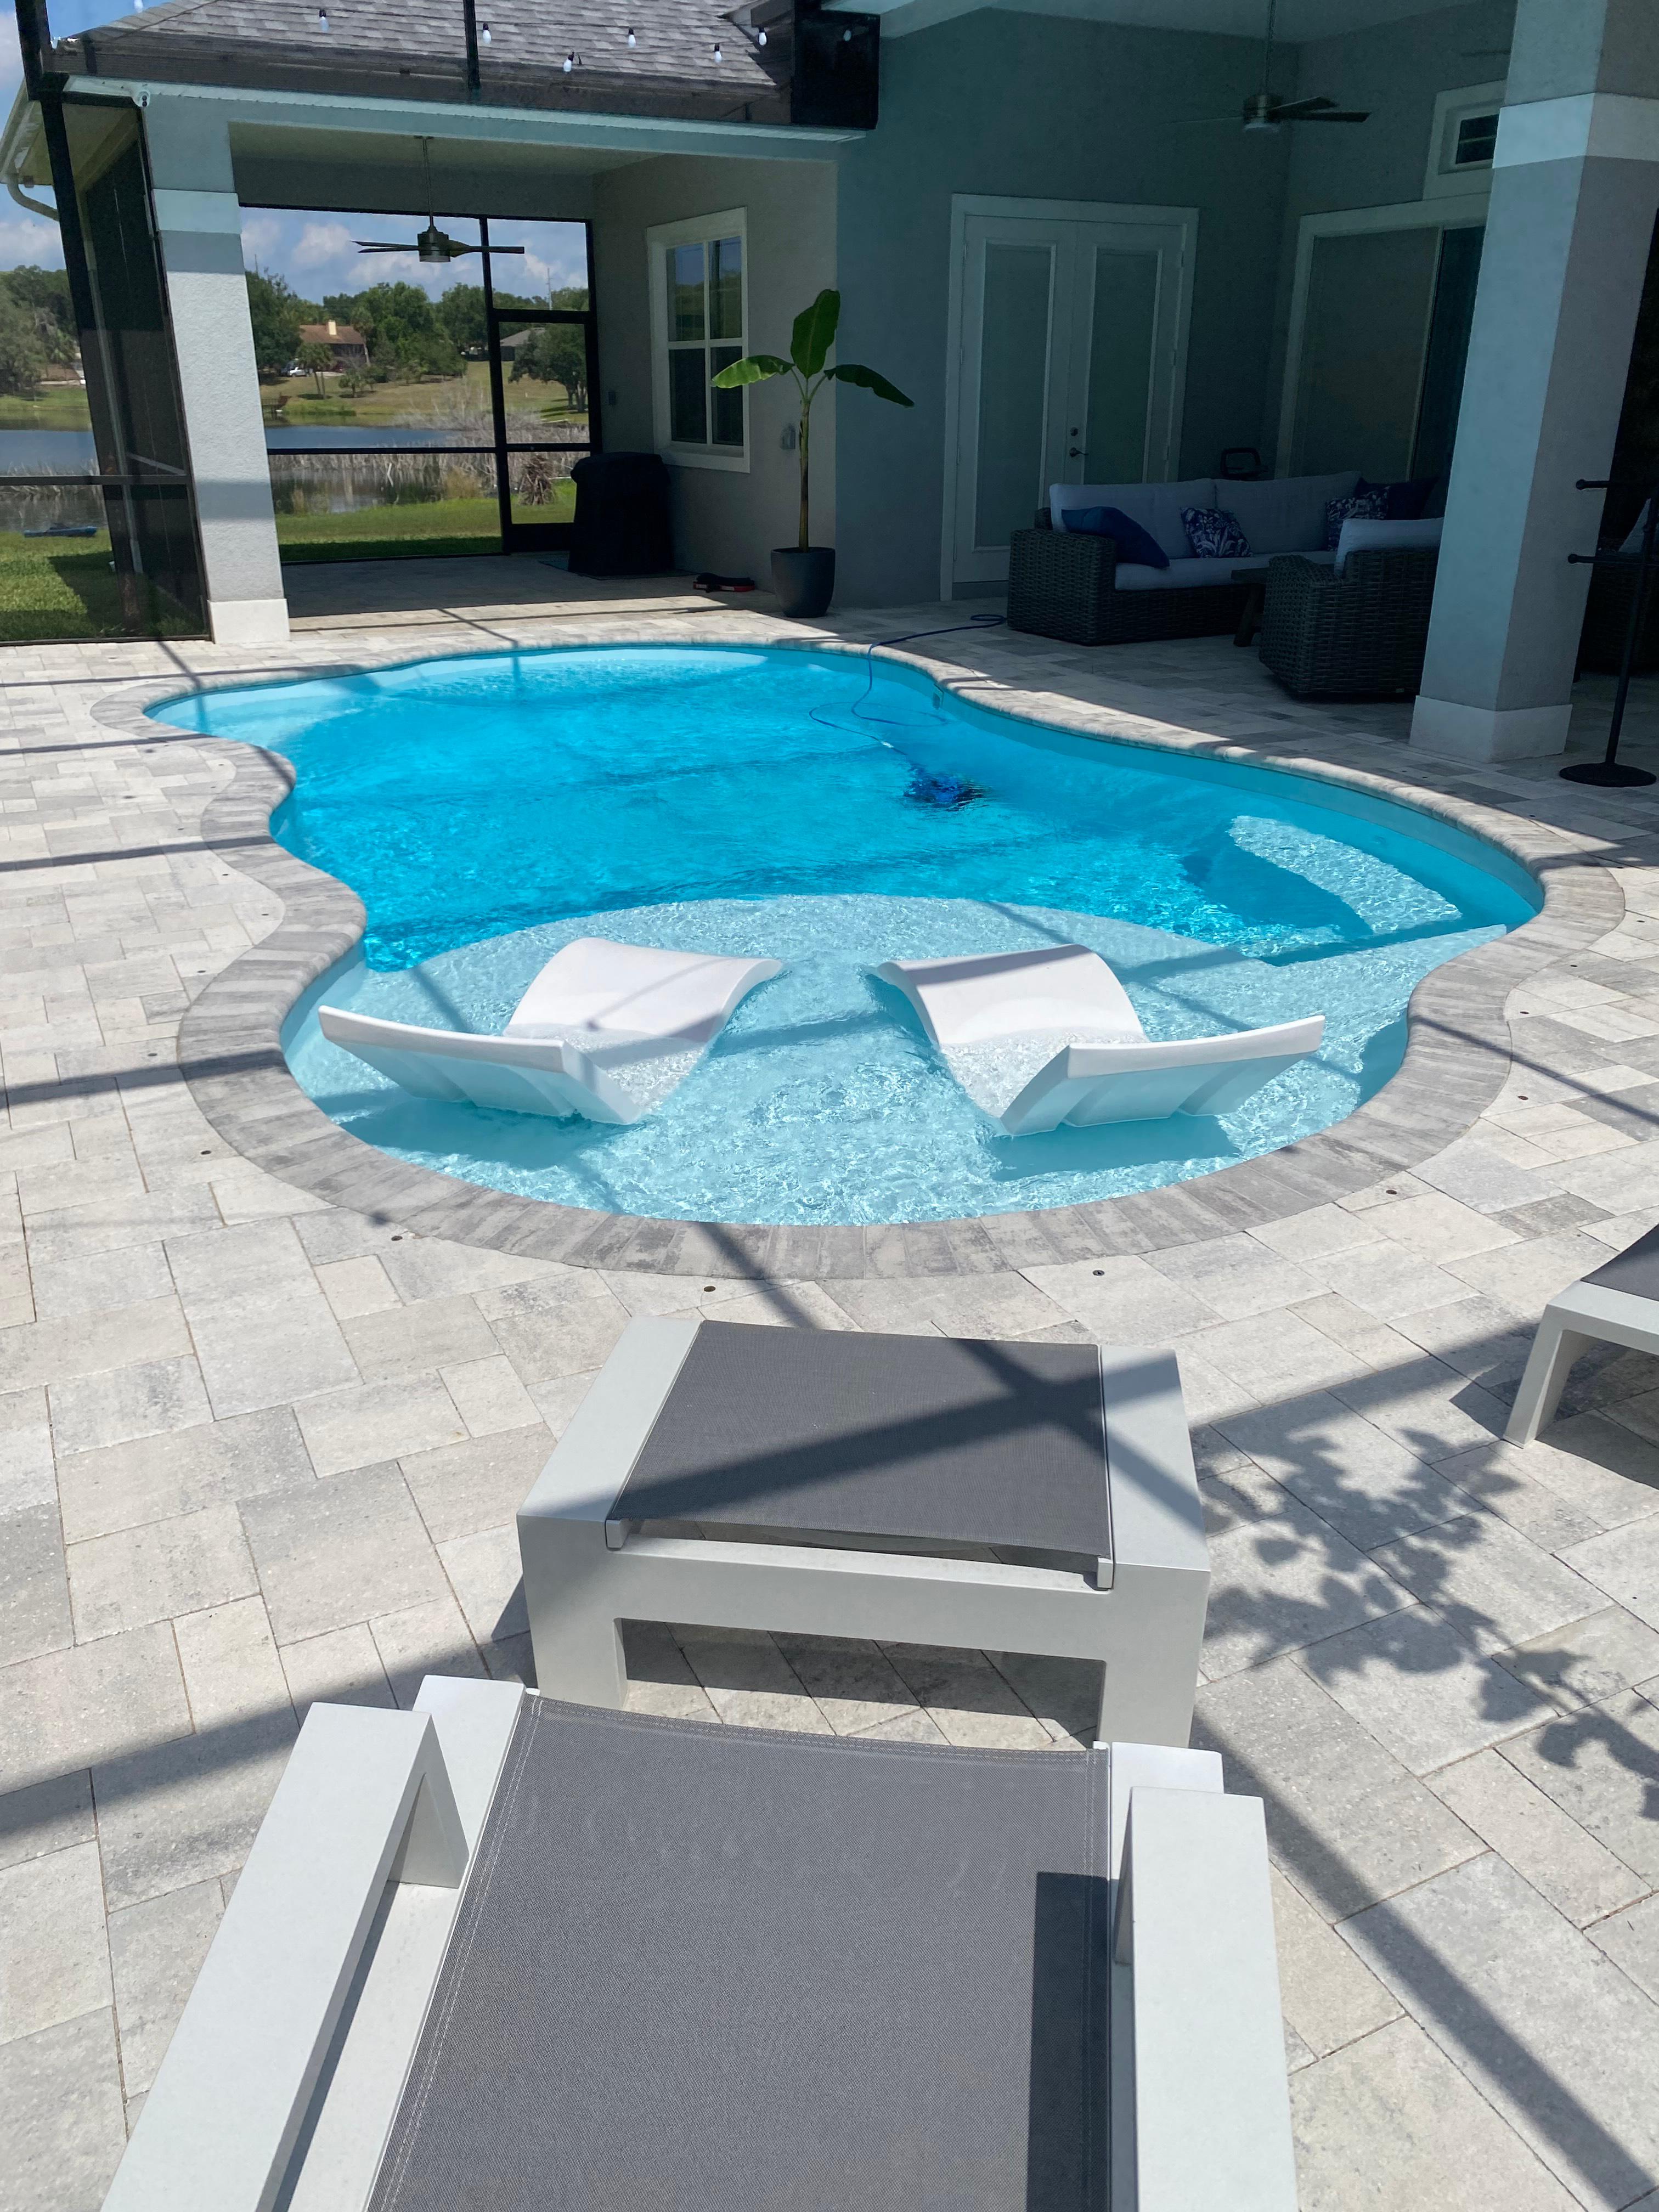 Pools for Sale